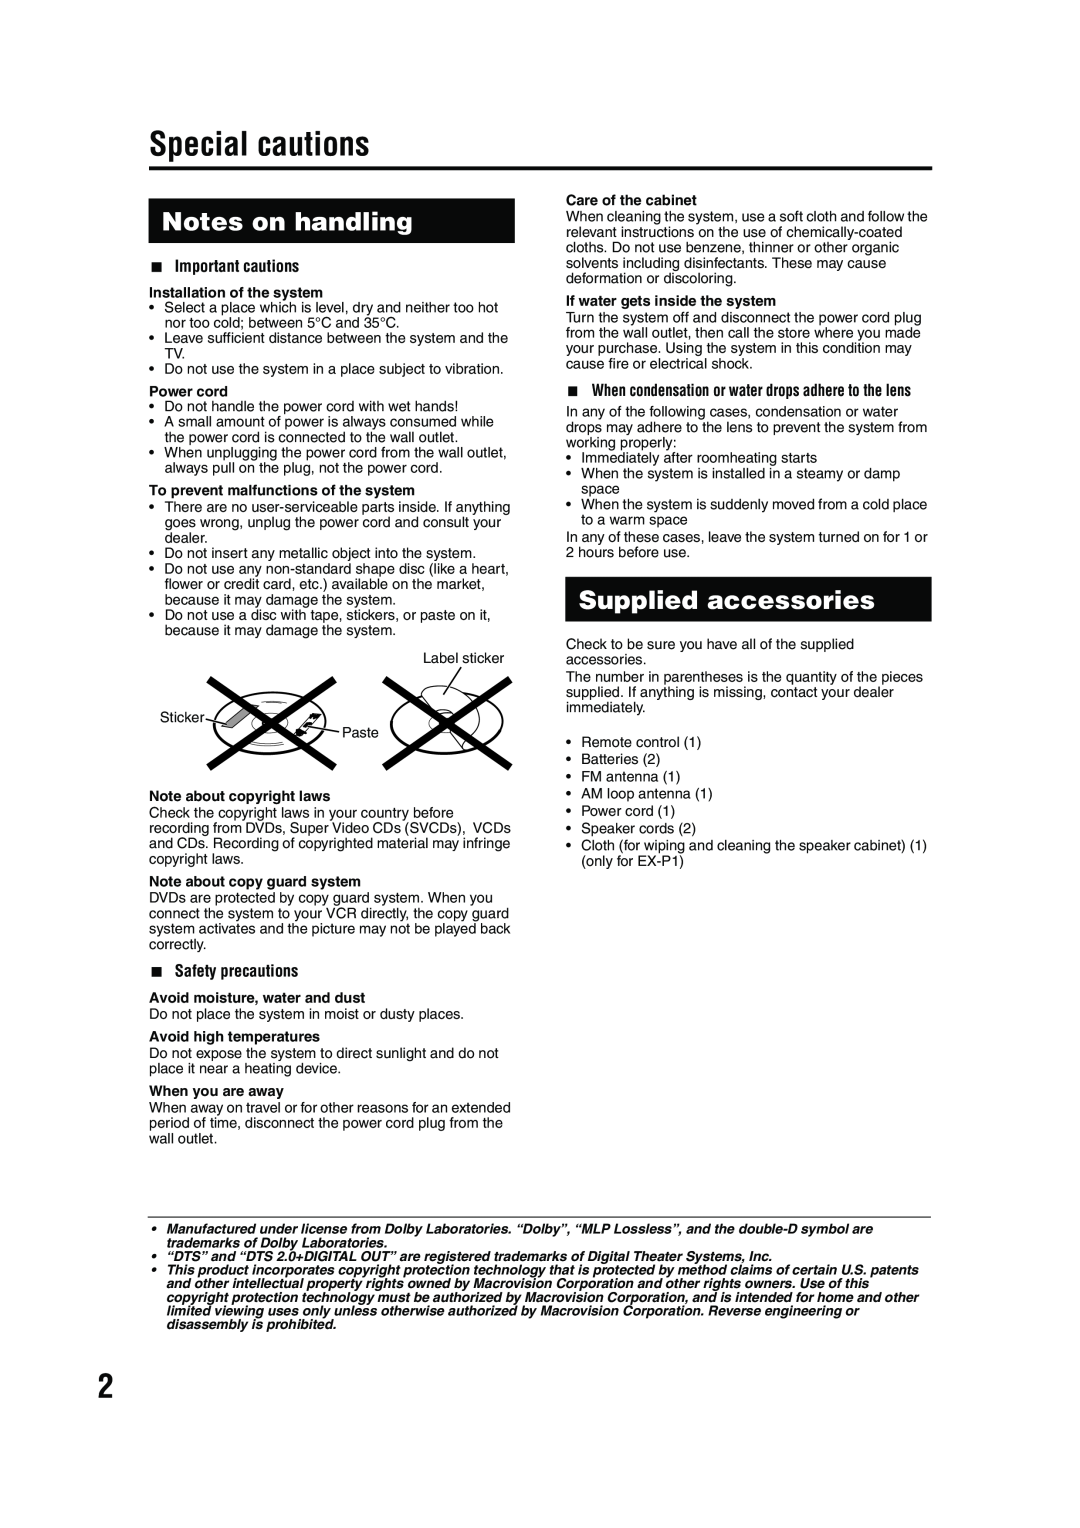 JVC LVT1284-004B manual Special cautions, Notes on handling, Supplied accessories, 7Important cautions, 7Safety precautions 